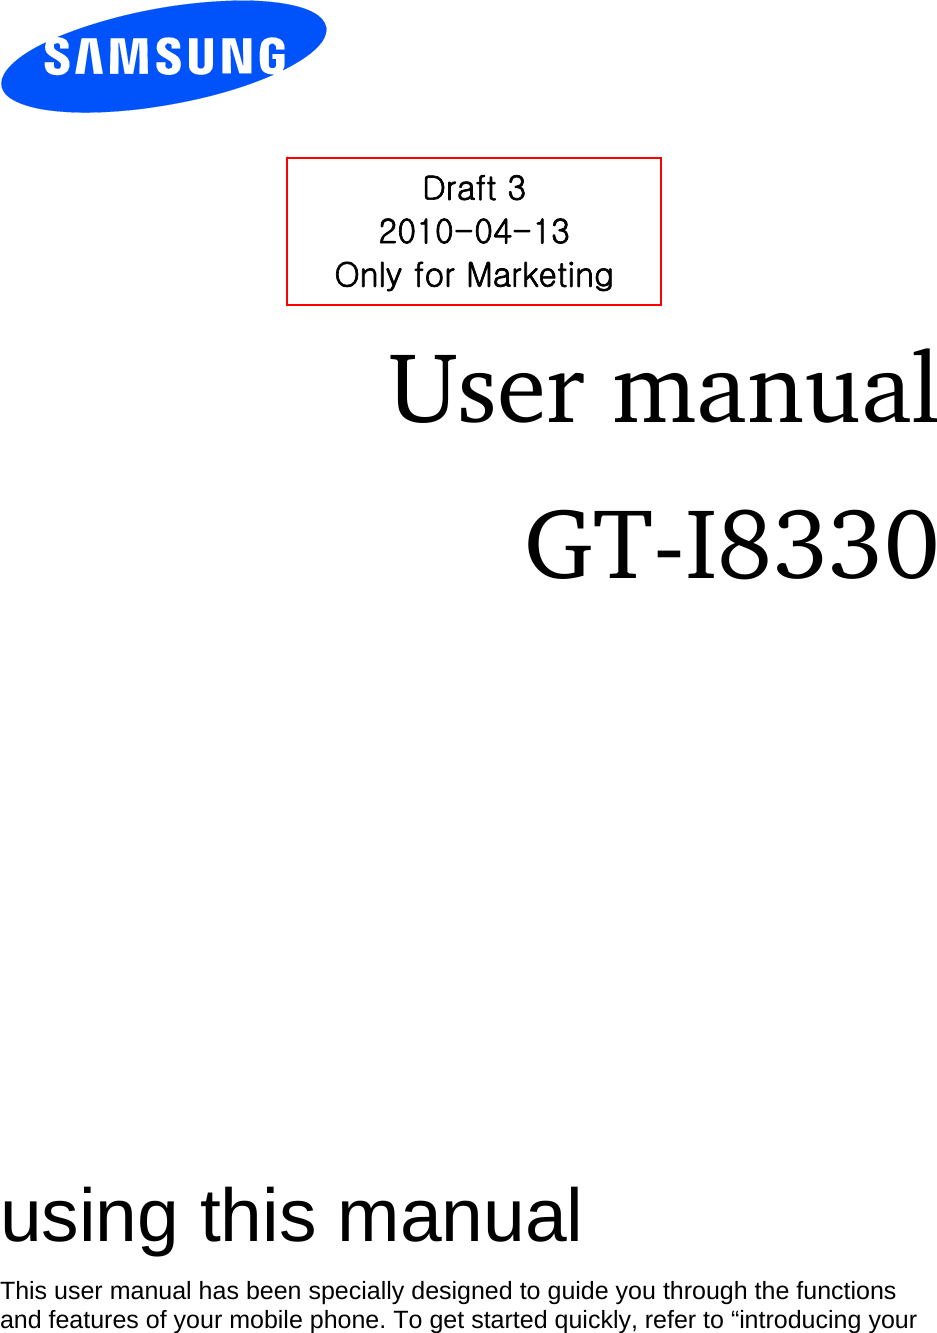          User manual GT-I8330                  using this manual This user manual has been specially designed to guide you through the functions and features of your mobile phone. To get started quickly, refer to “introducing your Draft 3 2010-04-13 Only for Marketing 